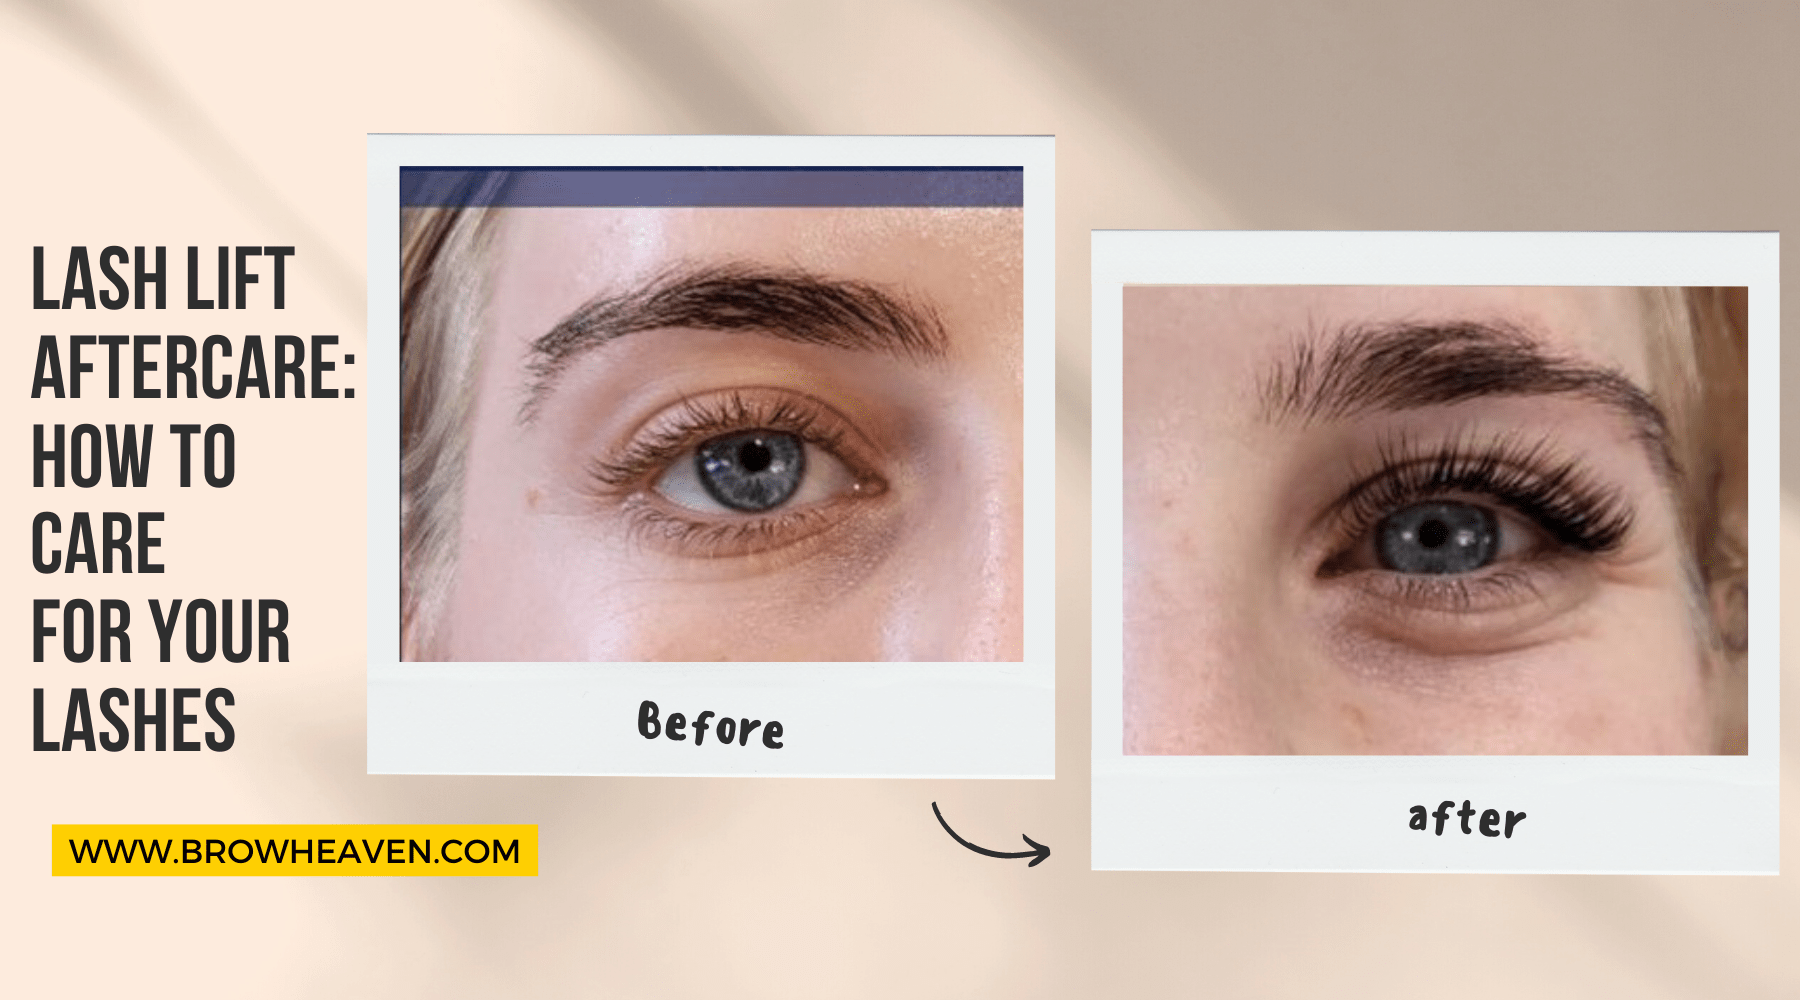 Lash Lift Aftercare: How to care for your lashes